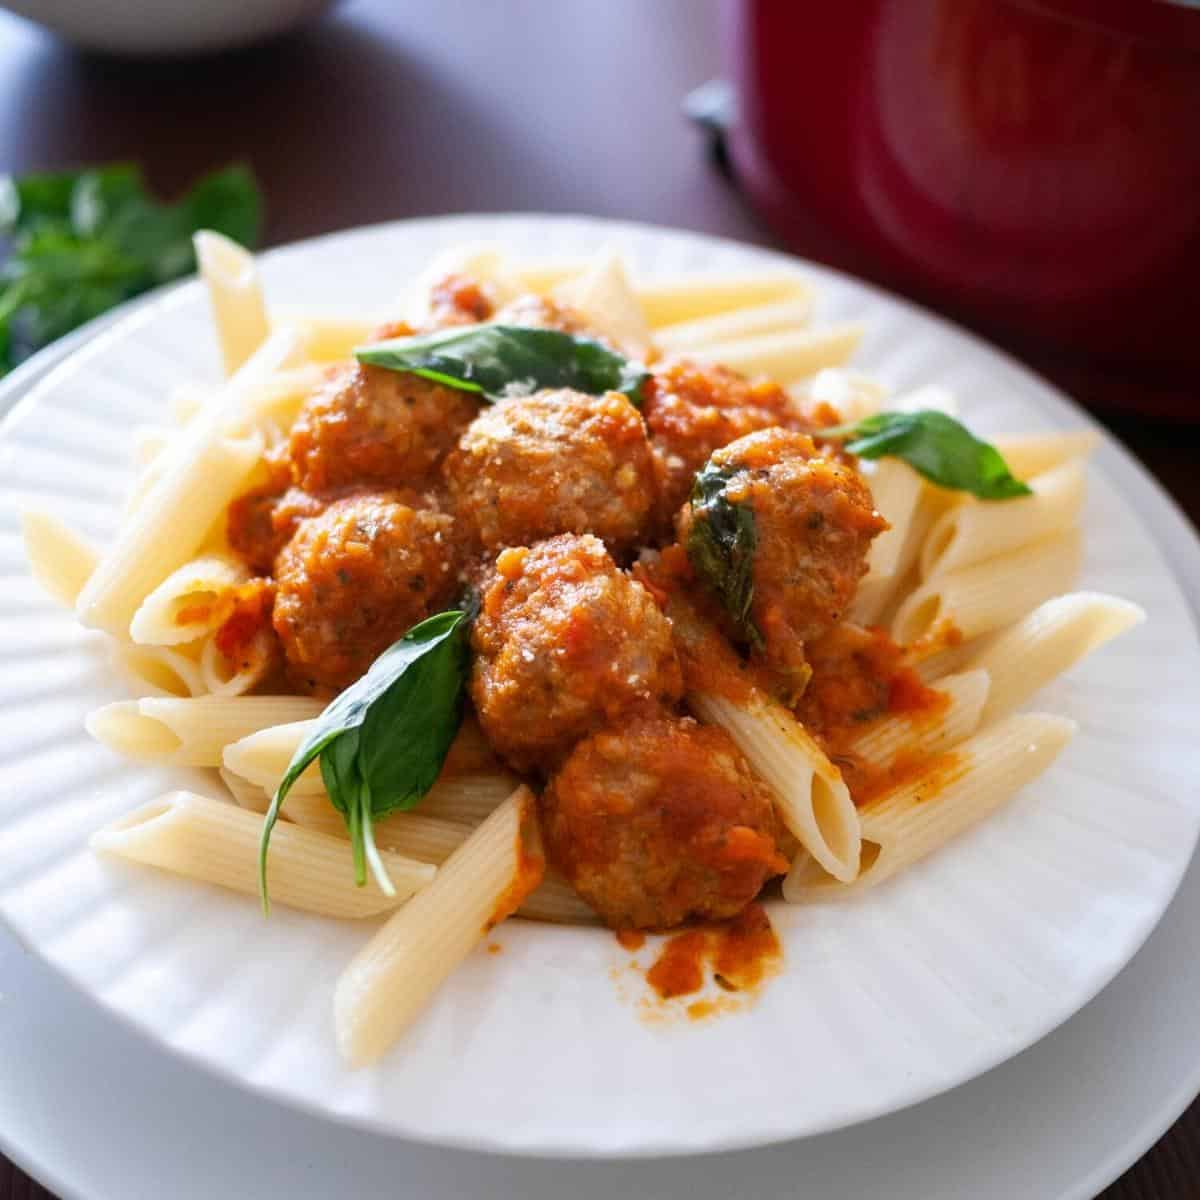 A plate of meatballs and pasta.